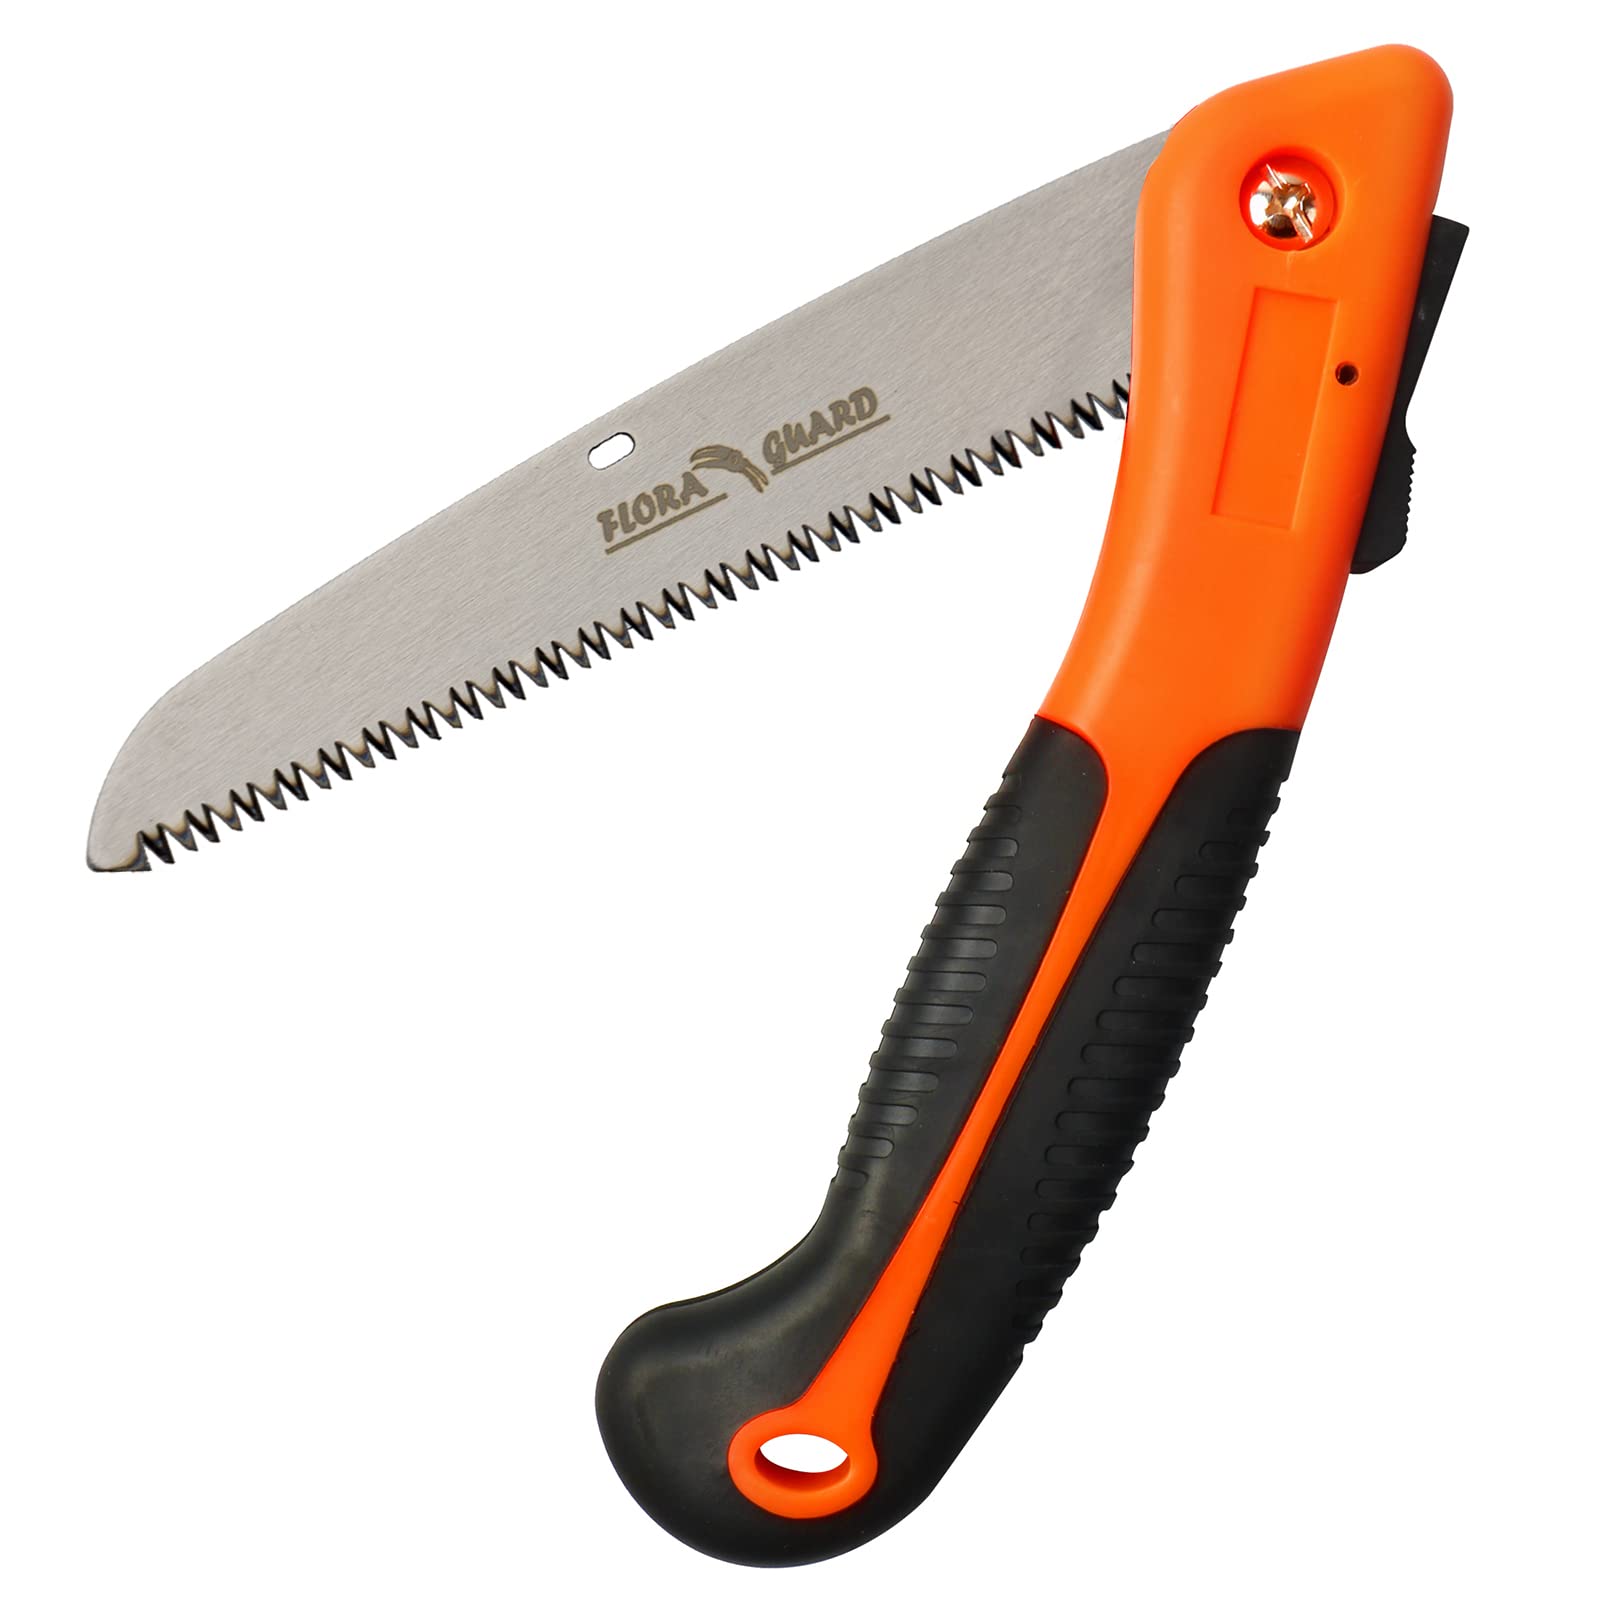 6.6" Flora Guard Folding Hand / Pruning Saw $4.99 + Free Ship w/Prime or on orders $35+